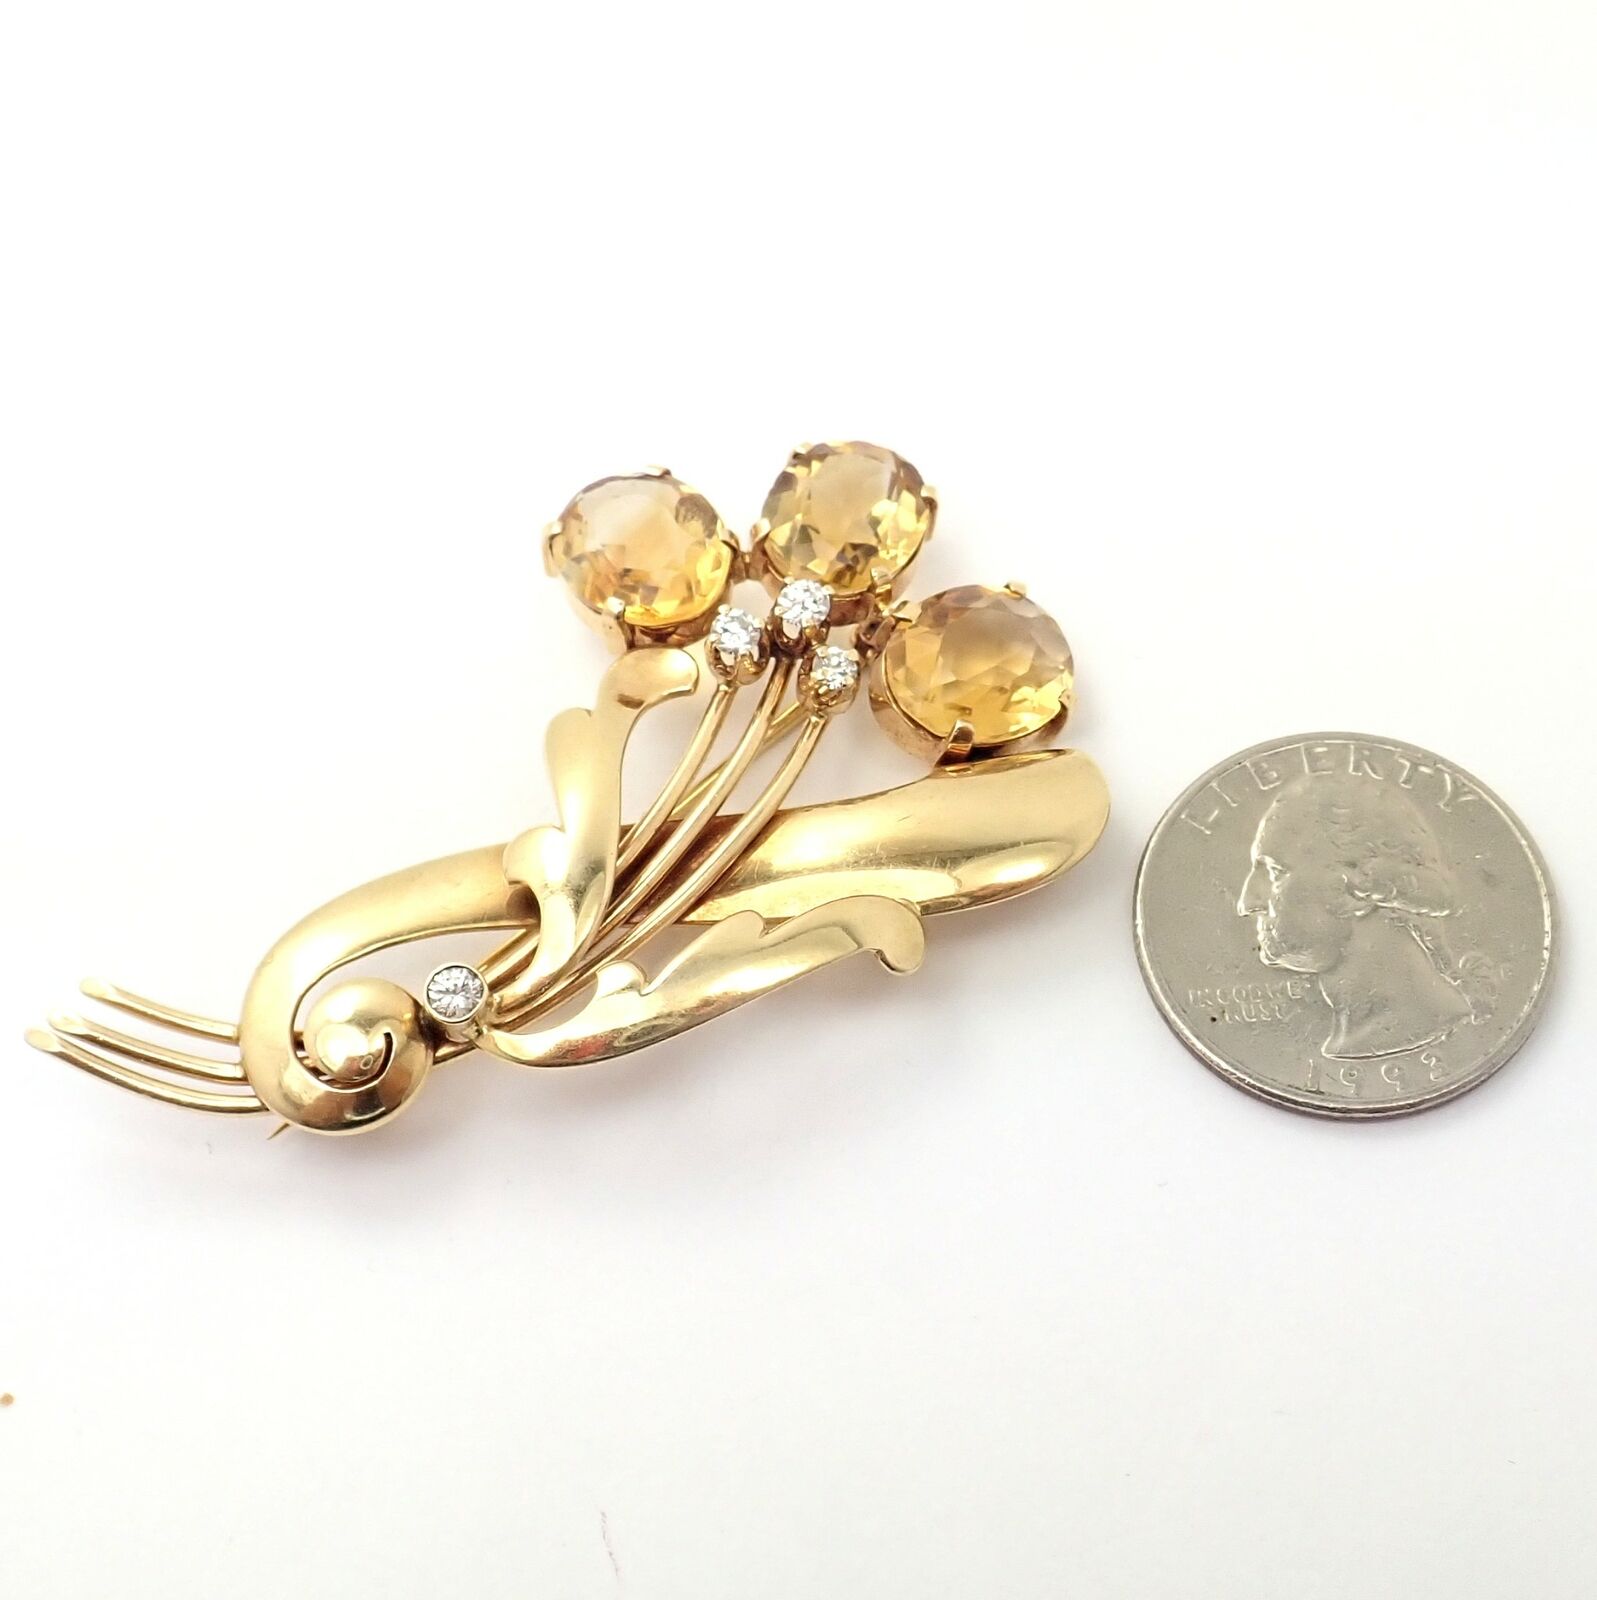 Tiffany & Co. Jewelry & Watches:Fine Jewelry:Brooches & Pins Rare! Vintage Authentic Tiffany & Co 14k Yellow Gold Citrine Diamond Pin Brooch